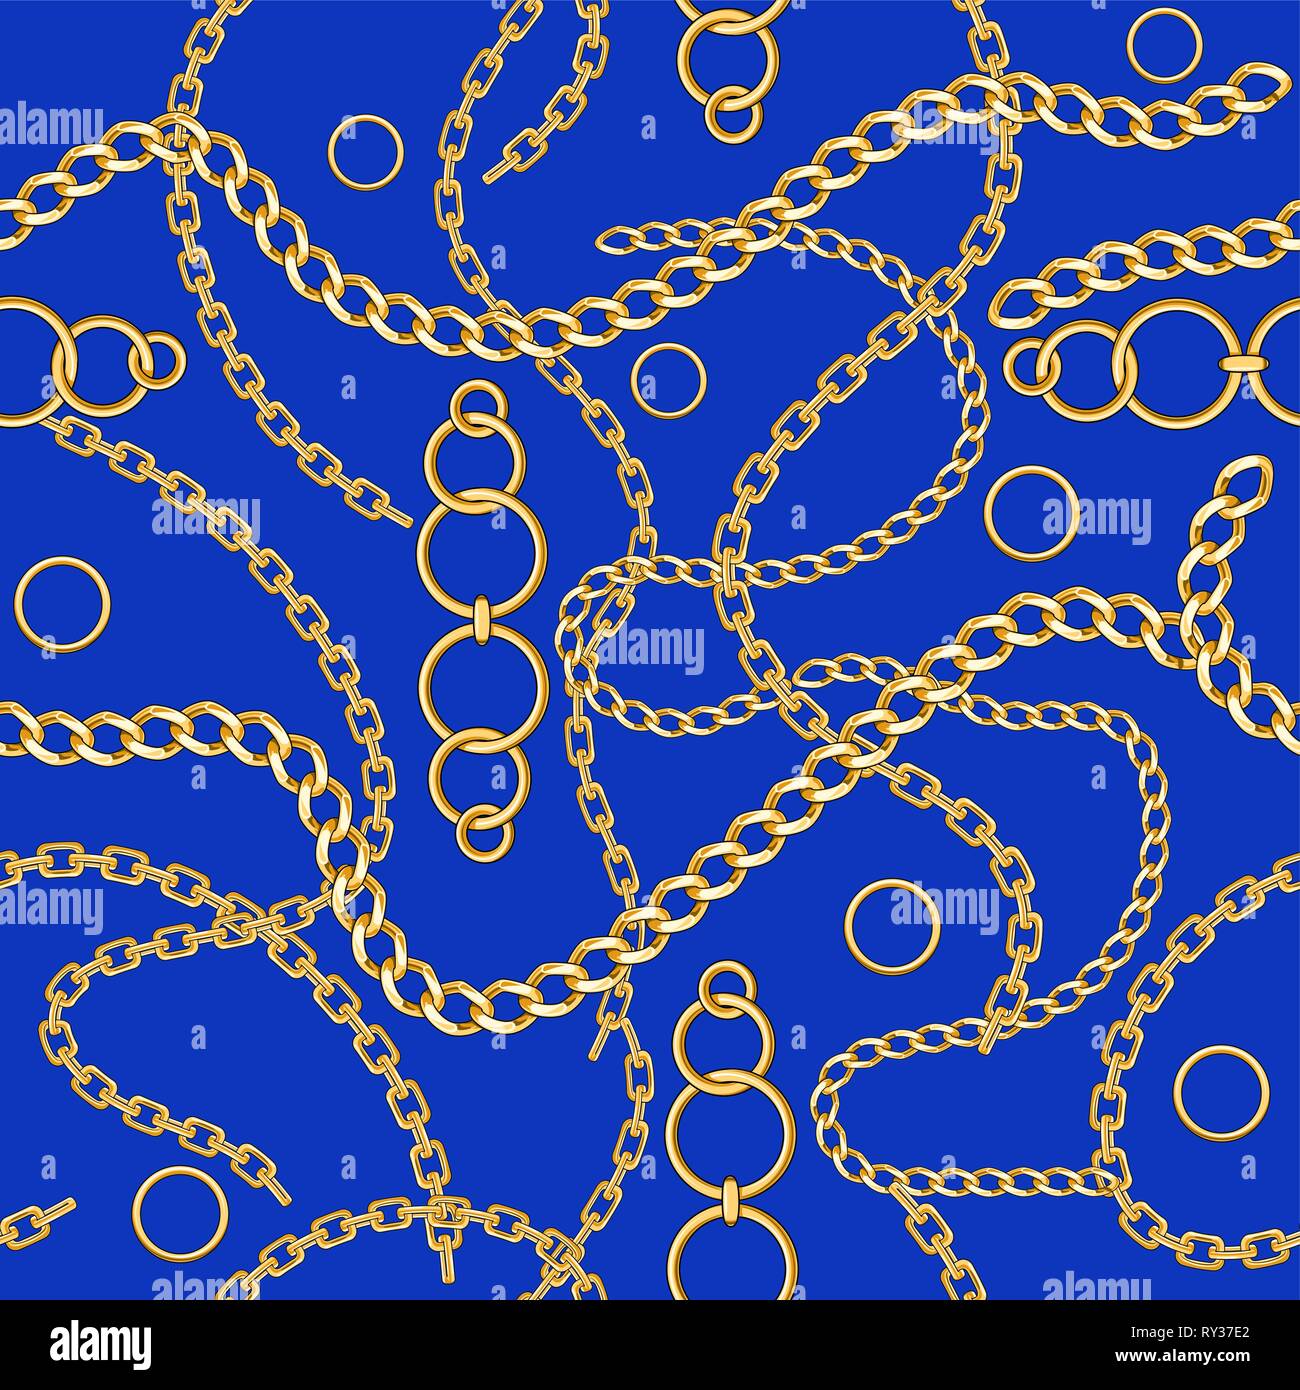 Abctract seamless pattern chain on blue background for fabric. Trendy repeating background. Stock Vector